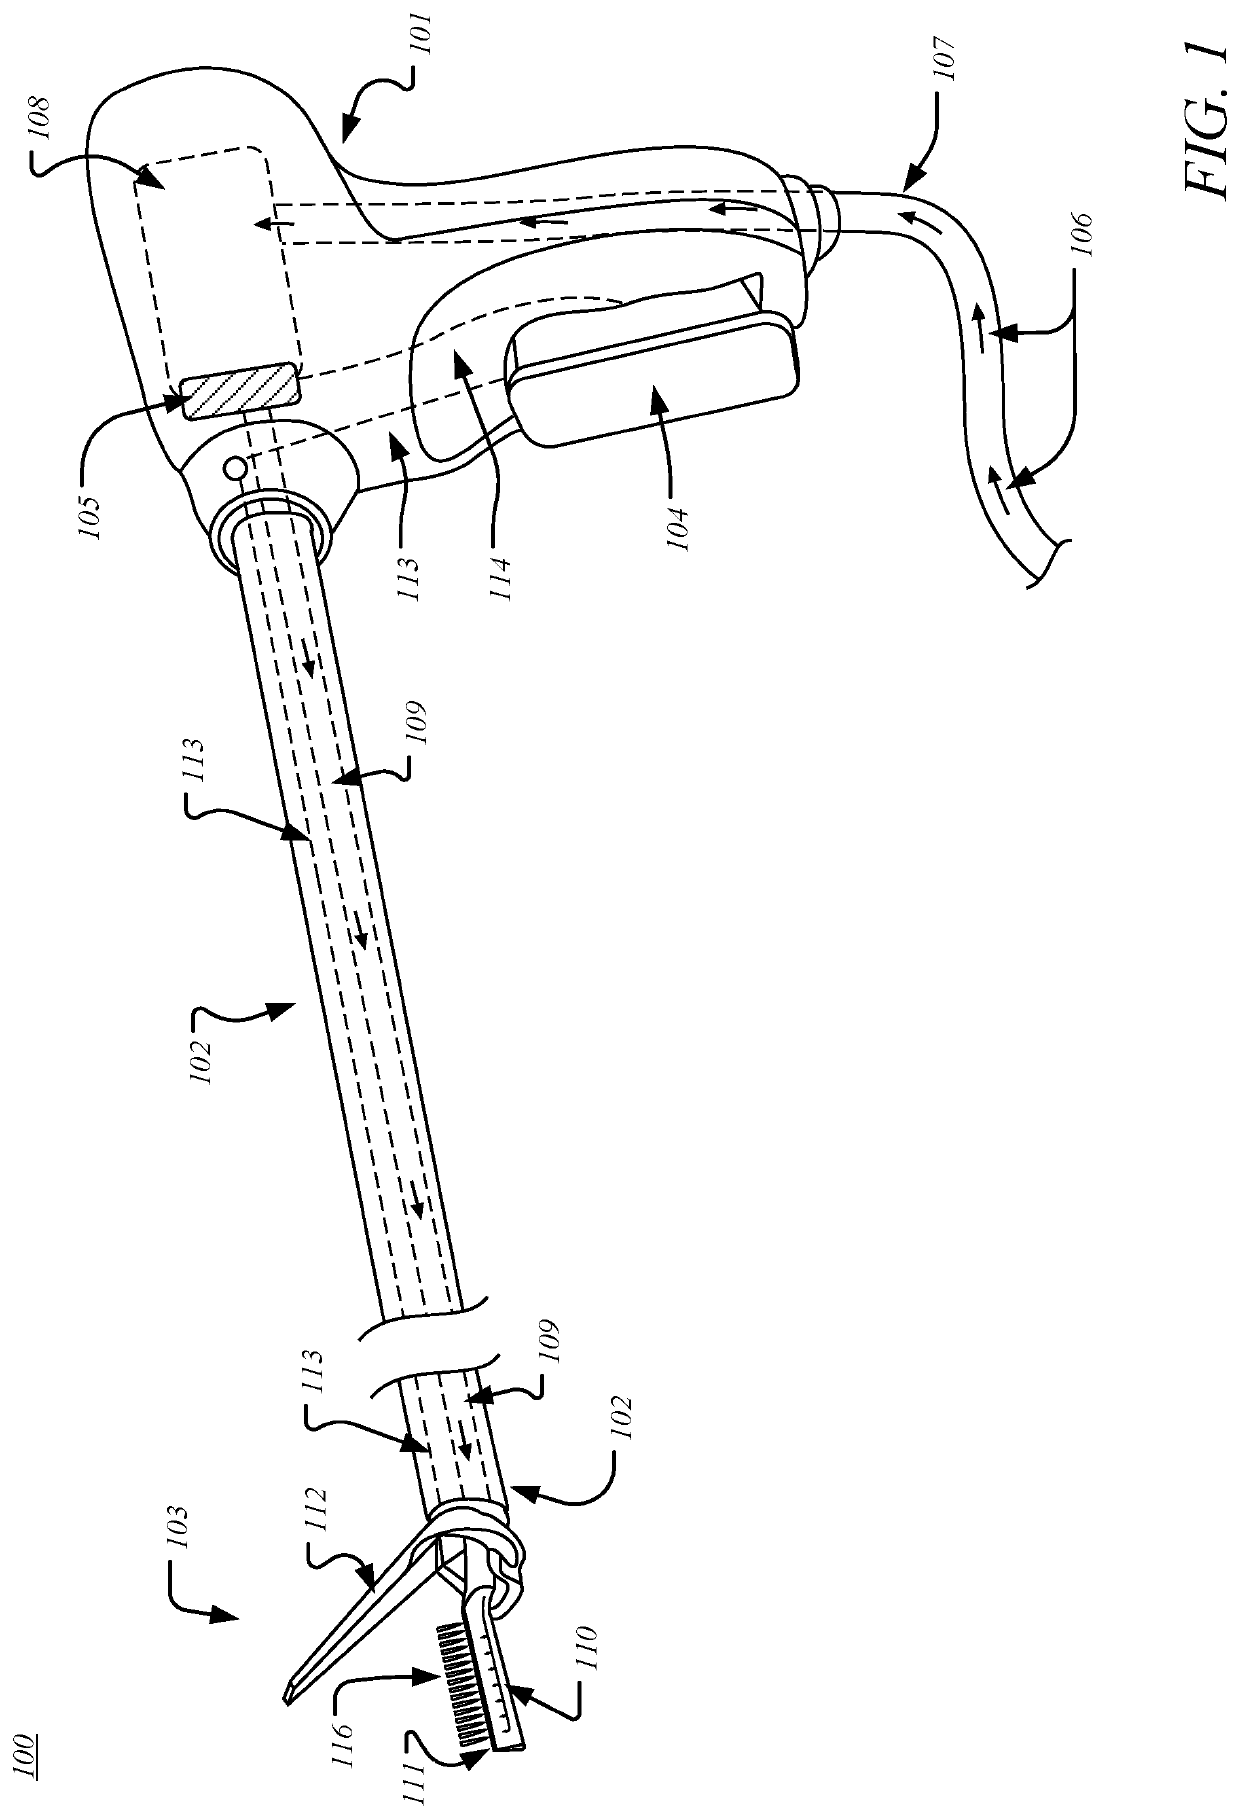 Method for cutting and hemostasis of biological tissue using high-pressure steam-based surgical tool